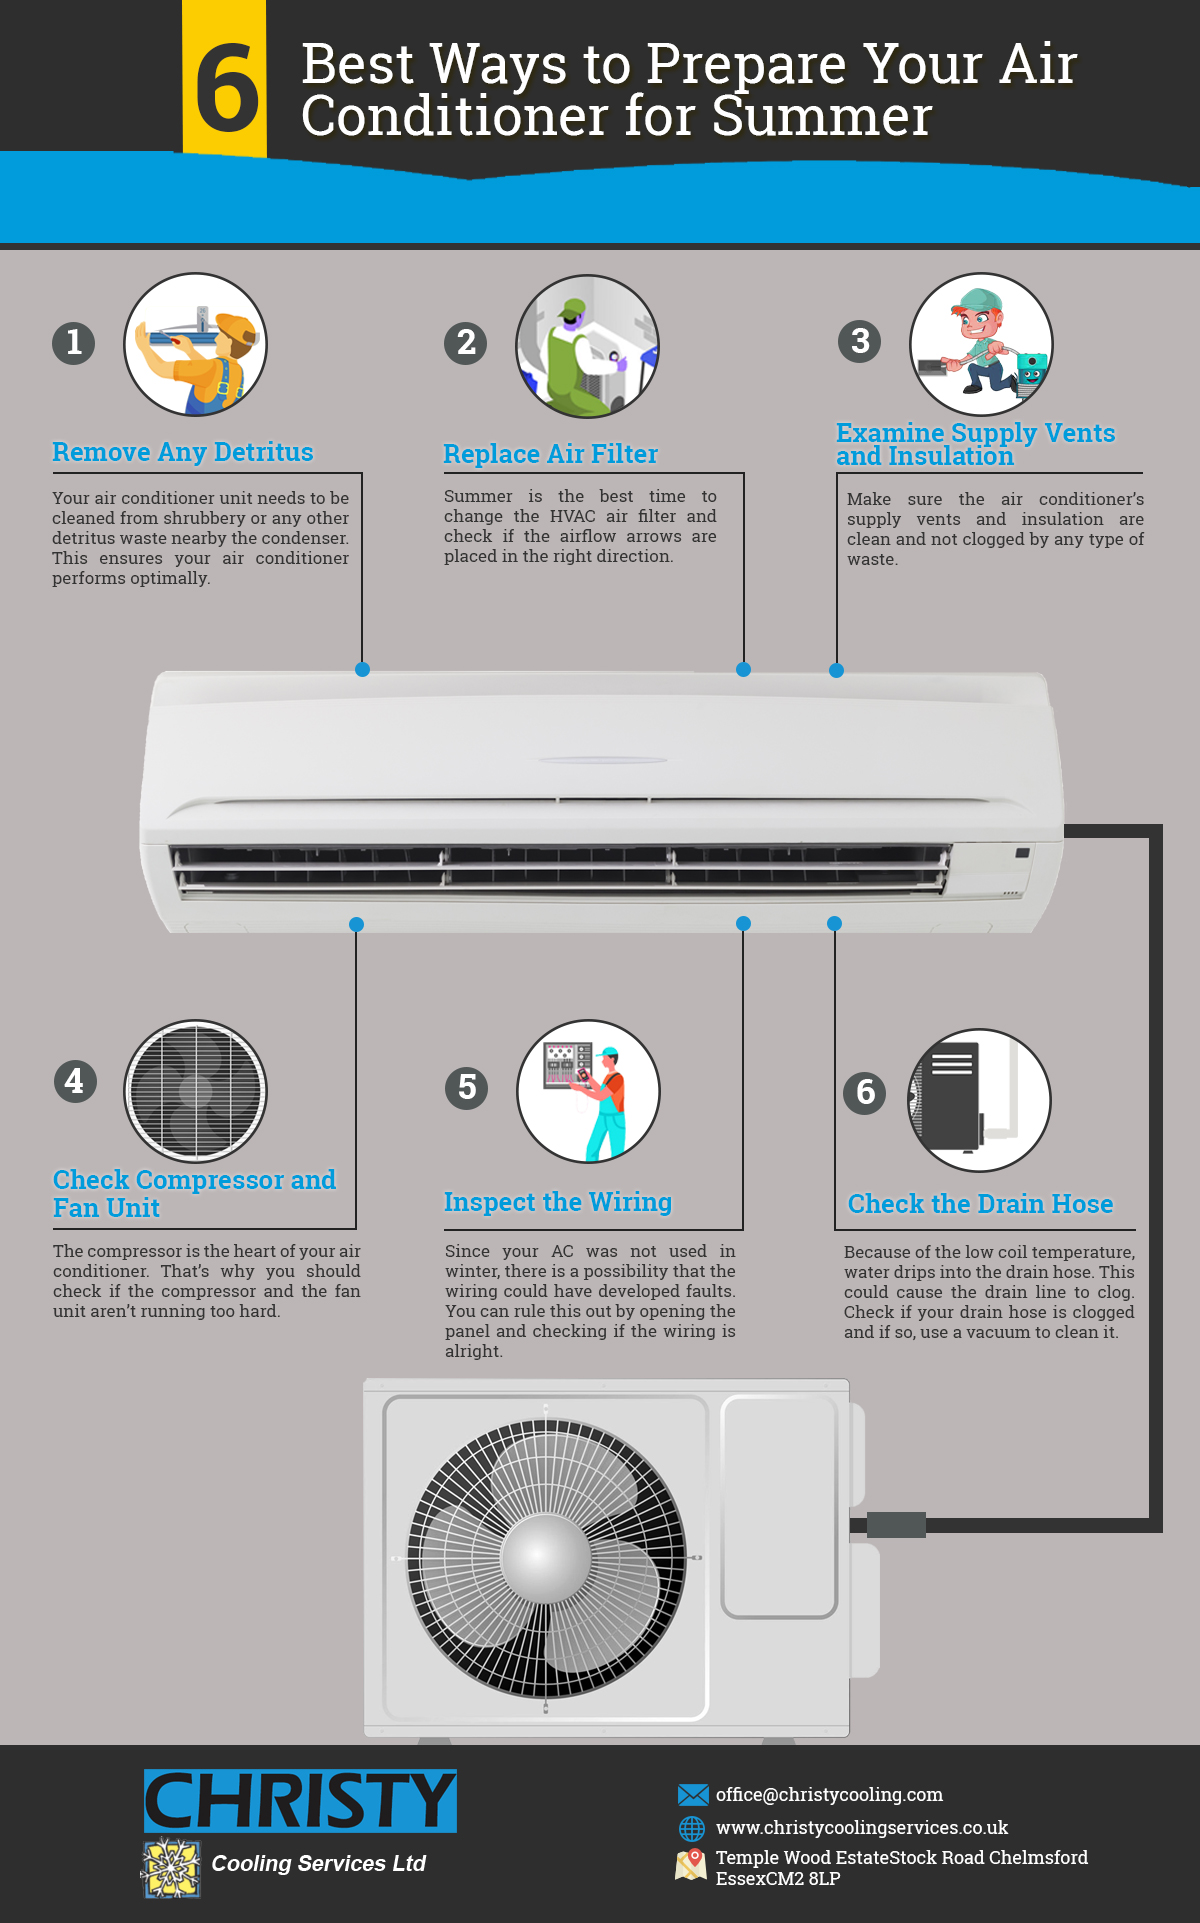 Prepare Your Air Conditioner for Summer